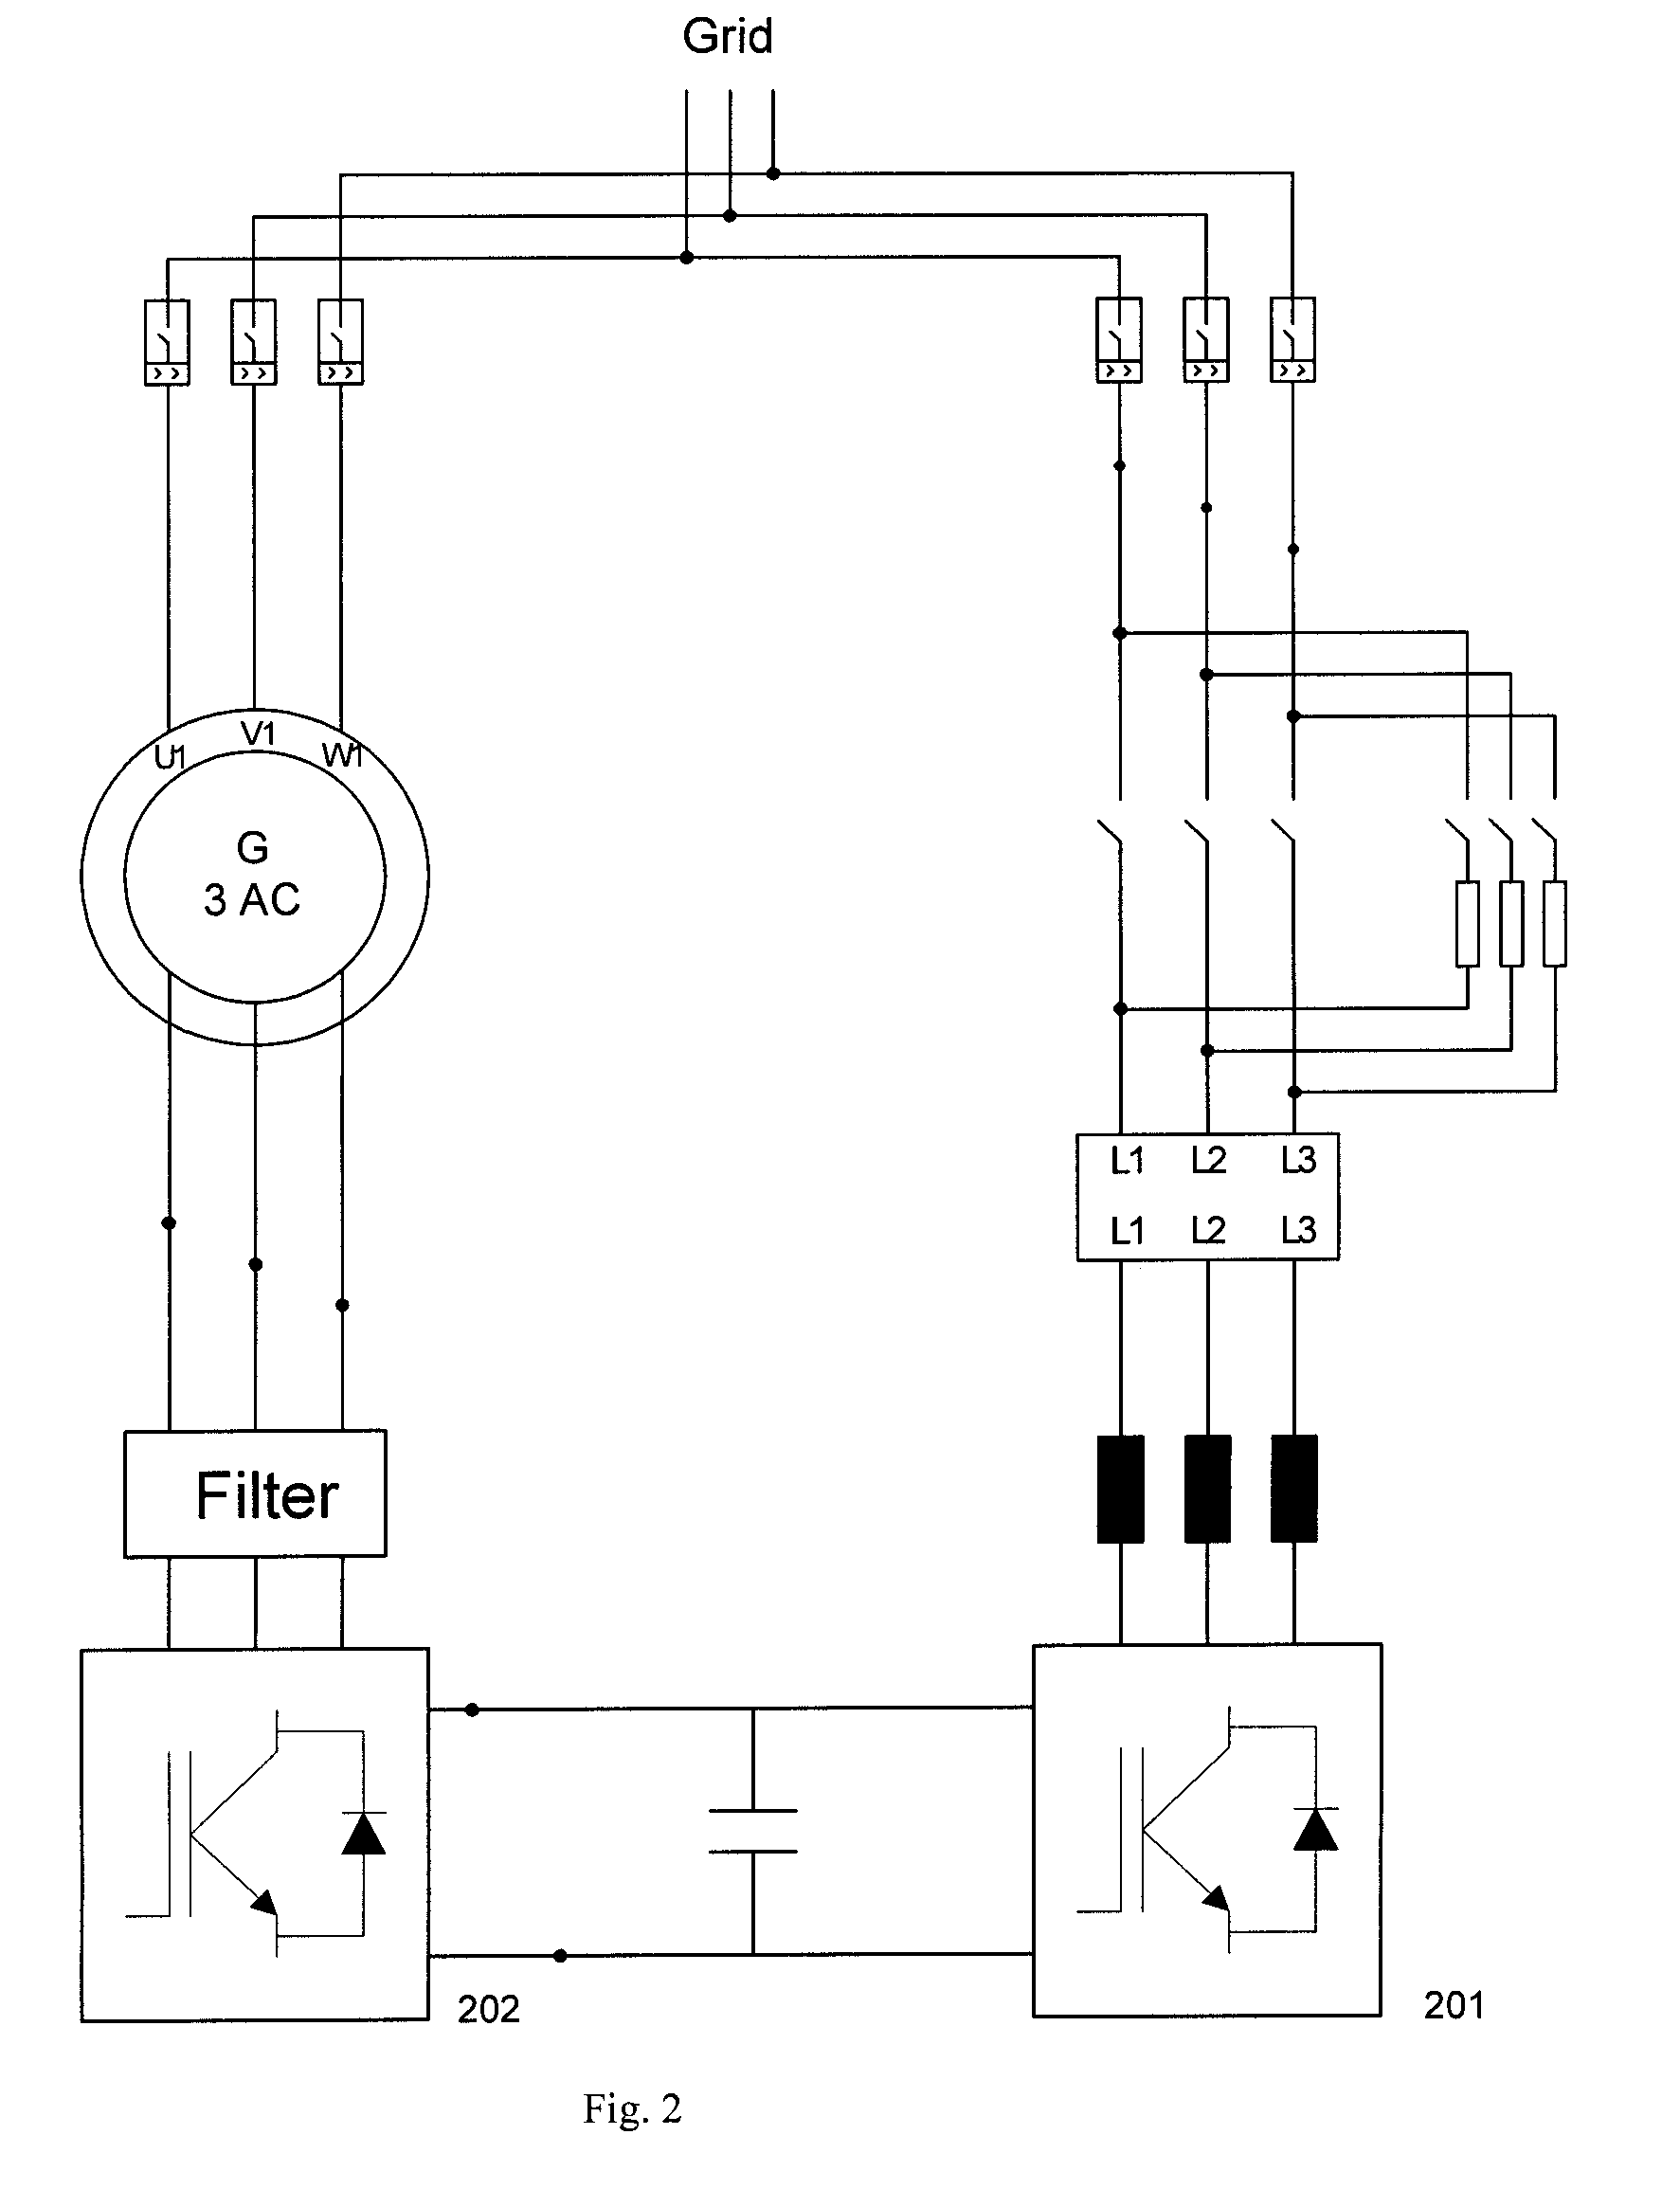 Low voltage ride through system for a variable speed wind turbine having an exciter machine and a power converter not connected to the grid